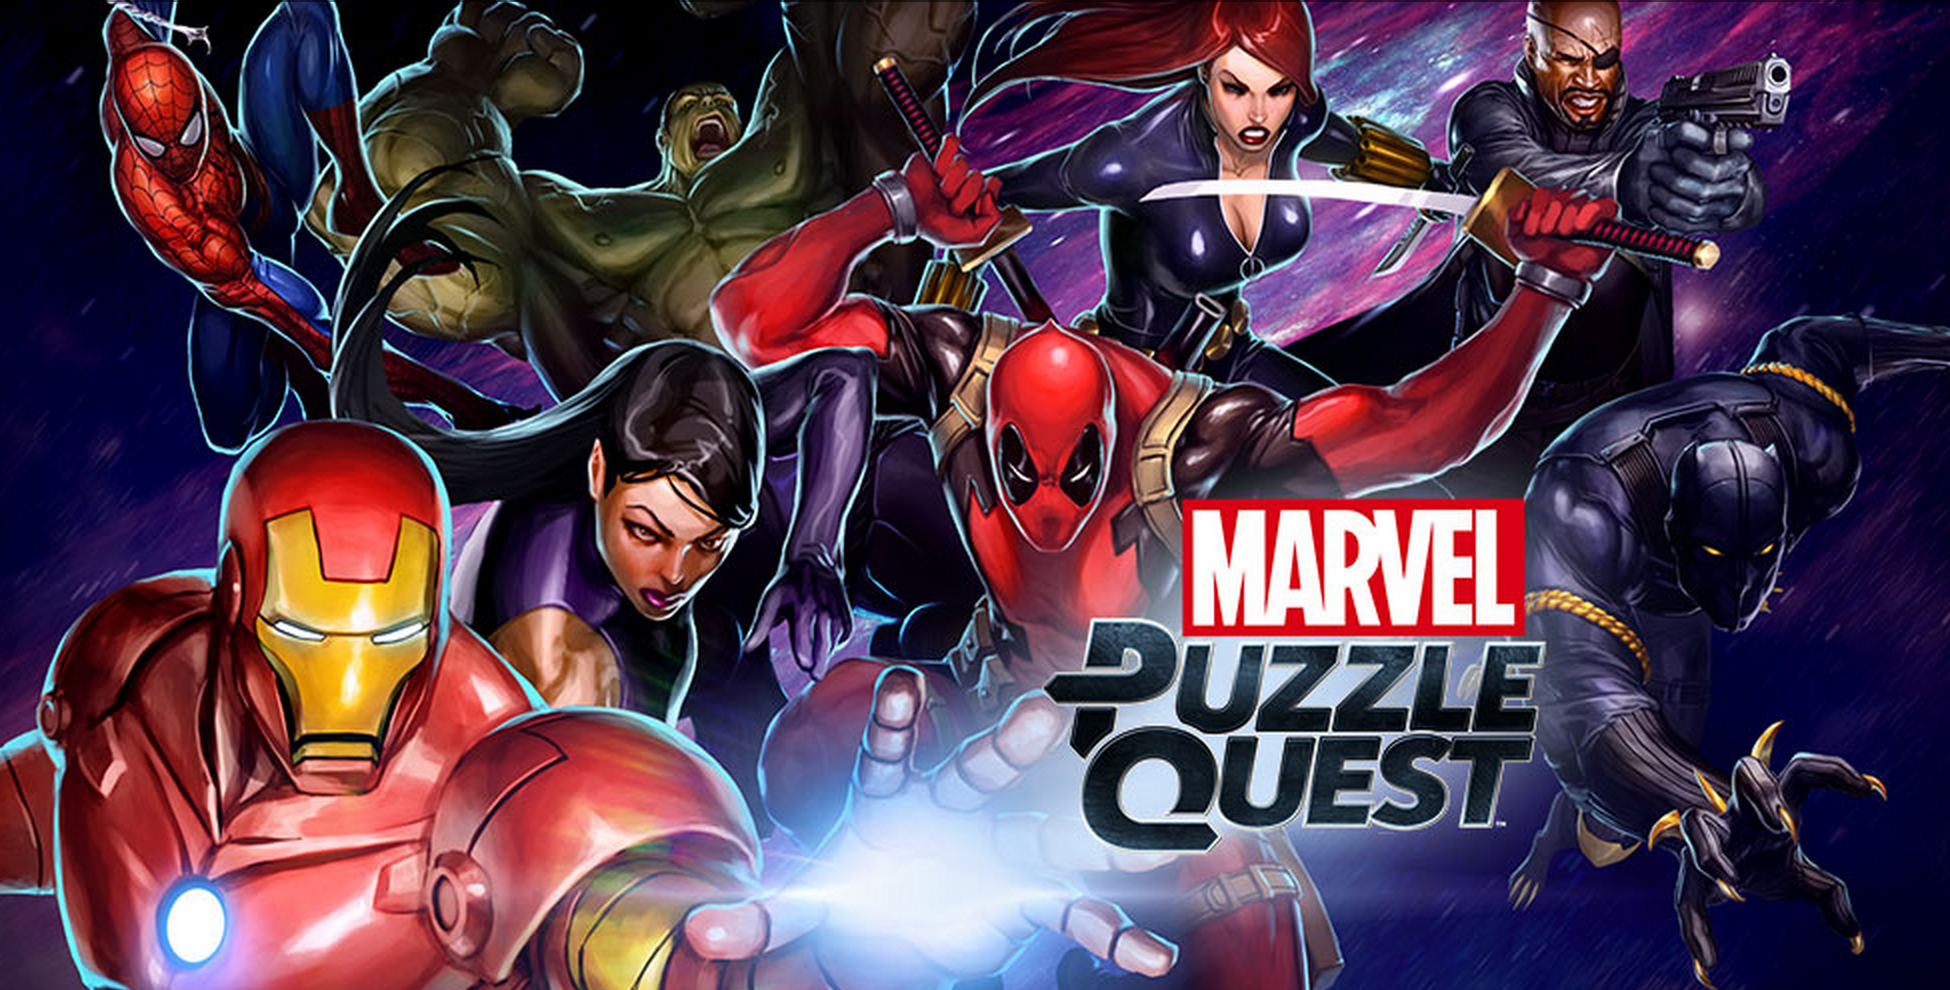 Marvel games wiki. Marvel Puzzle Quest. Марвел пазл квест. Conundrum Марвел. Marvel Puzzle Quest: Dark Reign.